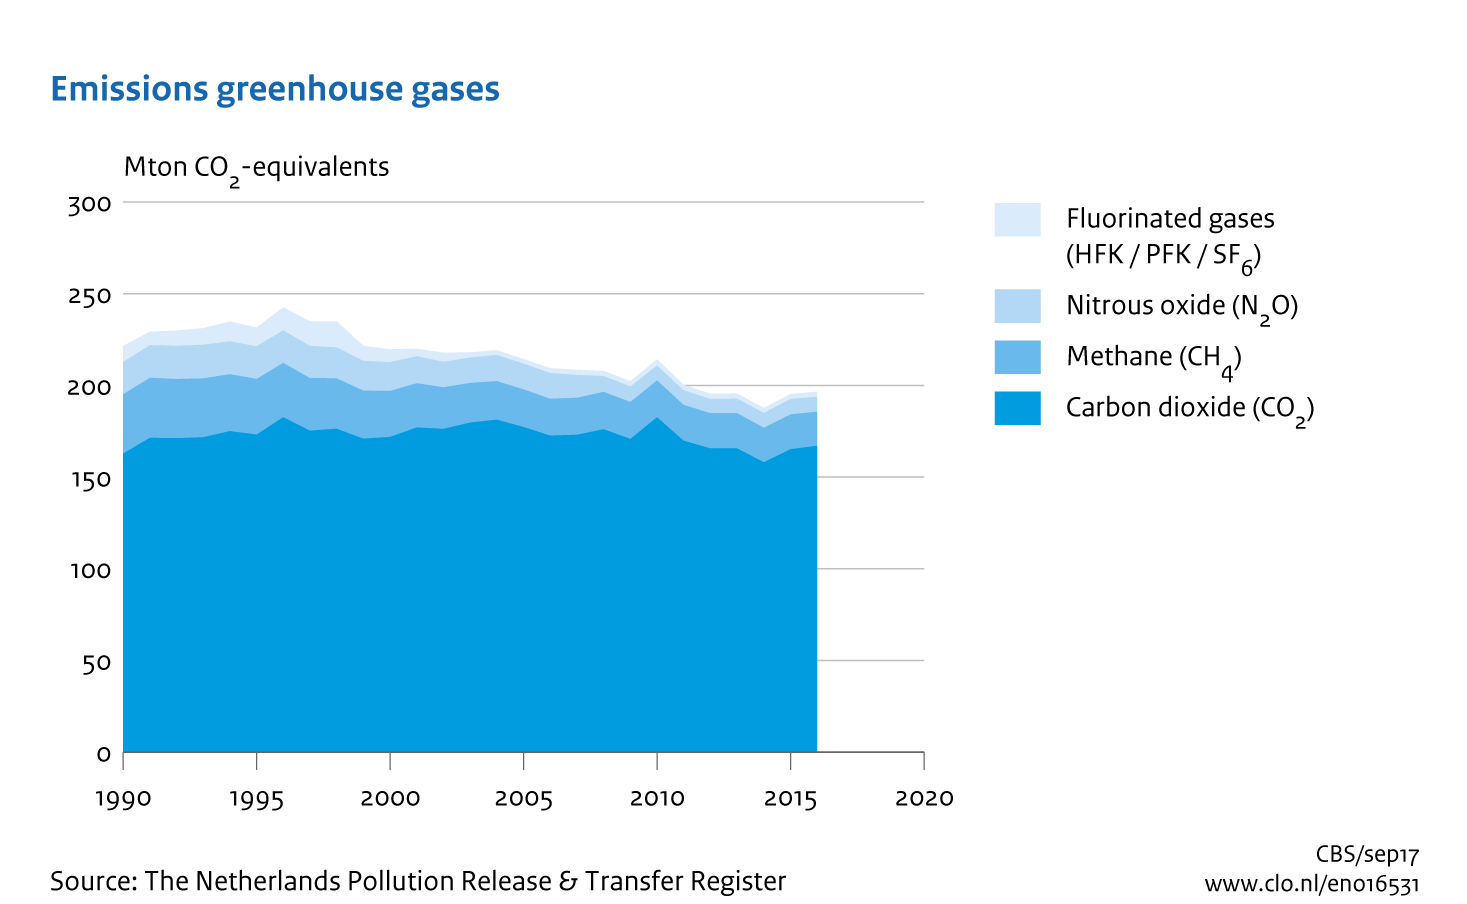 Image Greenhouse gas emissions. The image is further explained in the text.